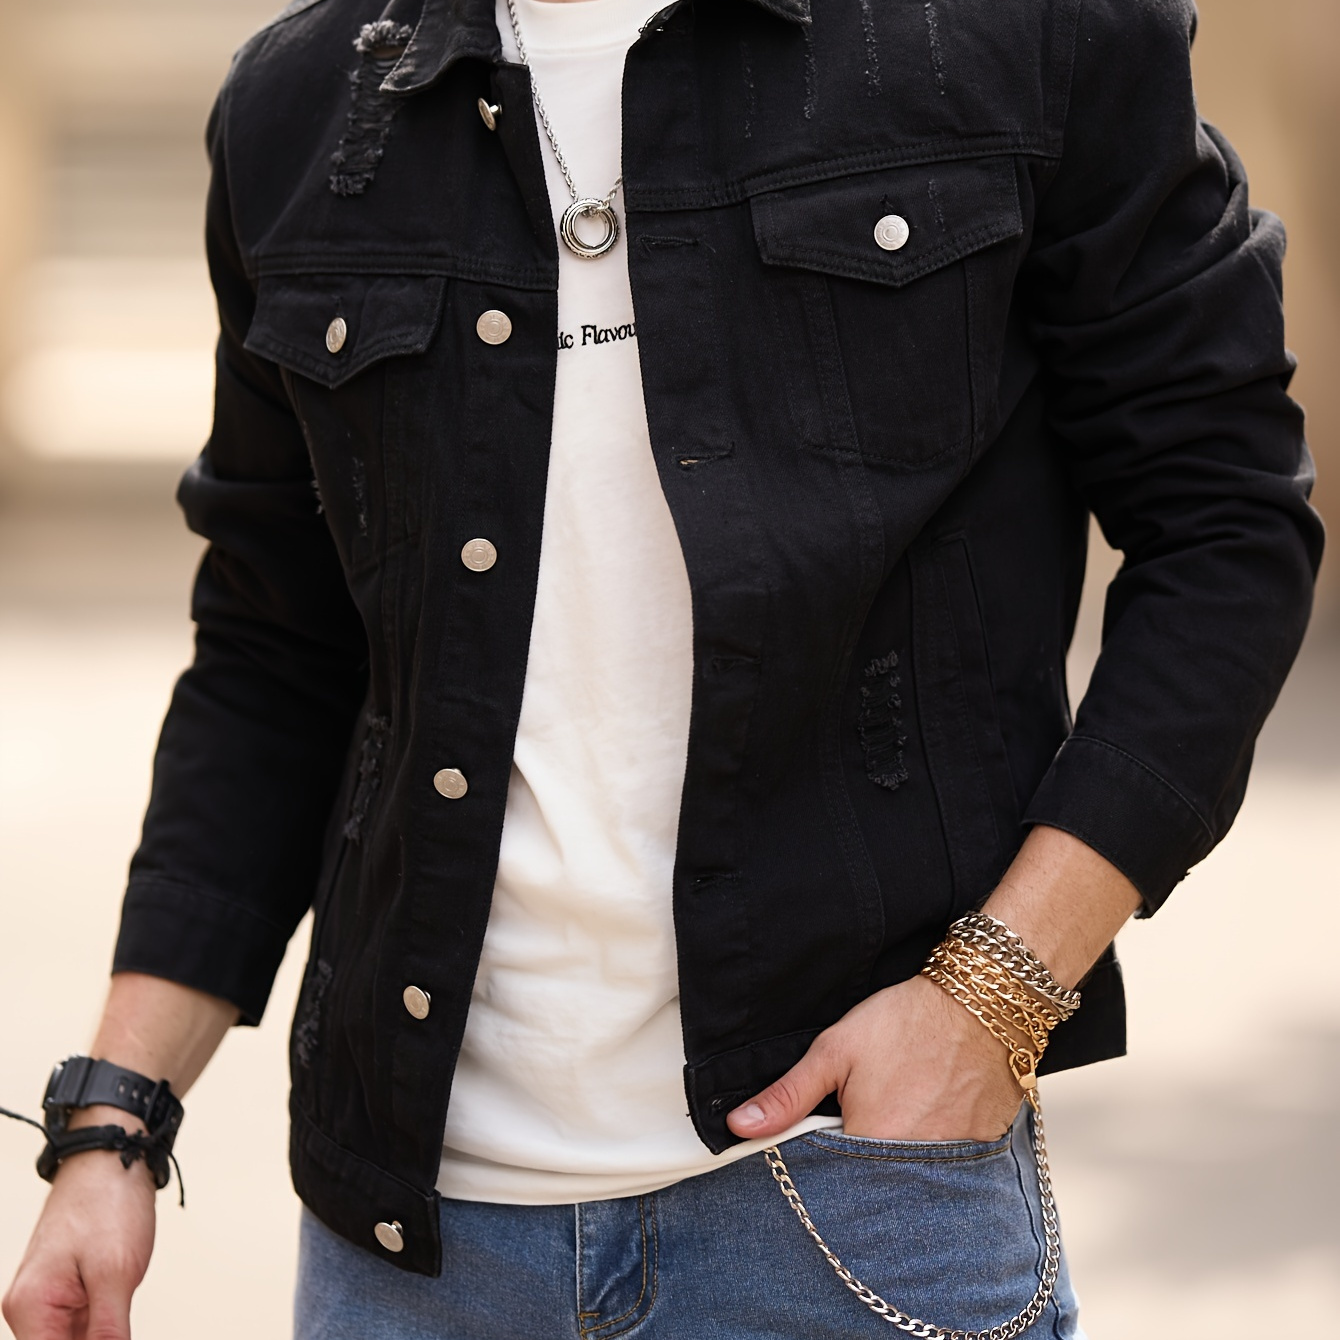 

Men's Fashion Solid Slim Fit Denim Jacket With Multiple Pockets, Casual Distinctive Outerwear For Spring And Fall